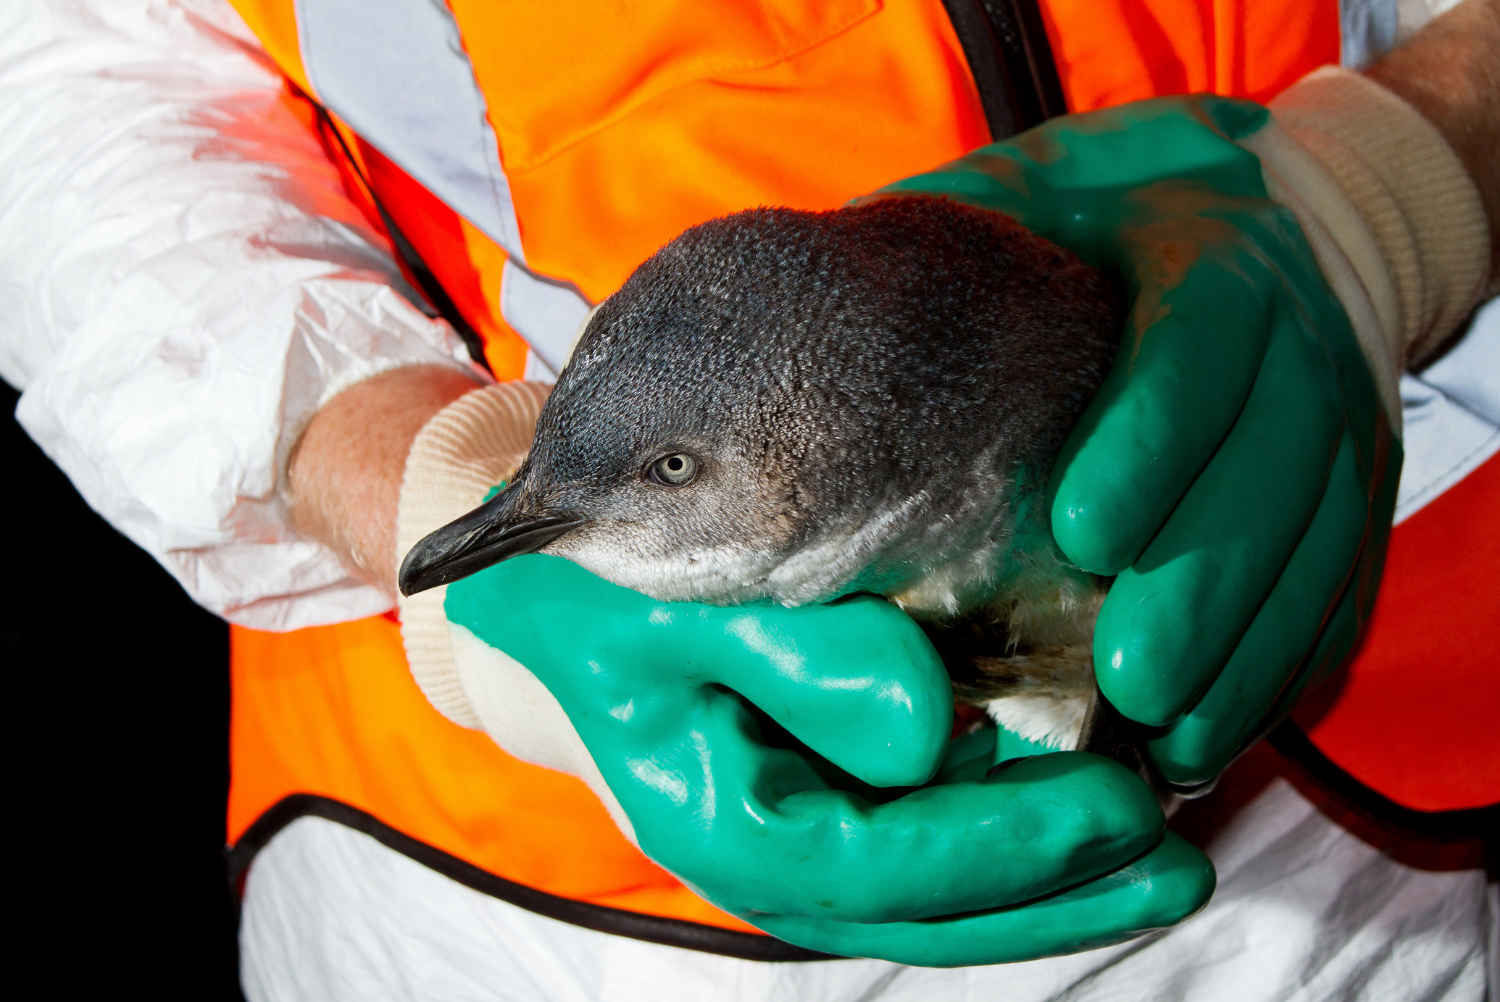 A rescued blue penguin from the Rena oil spill (2011) in New Zealand